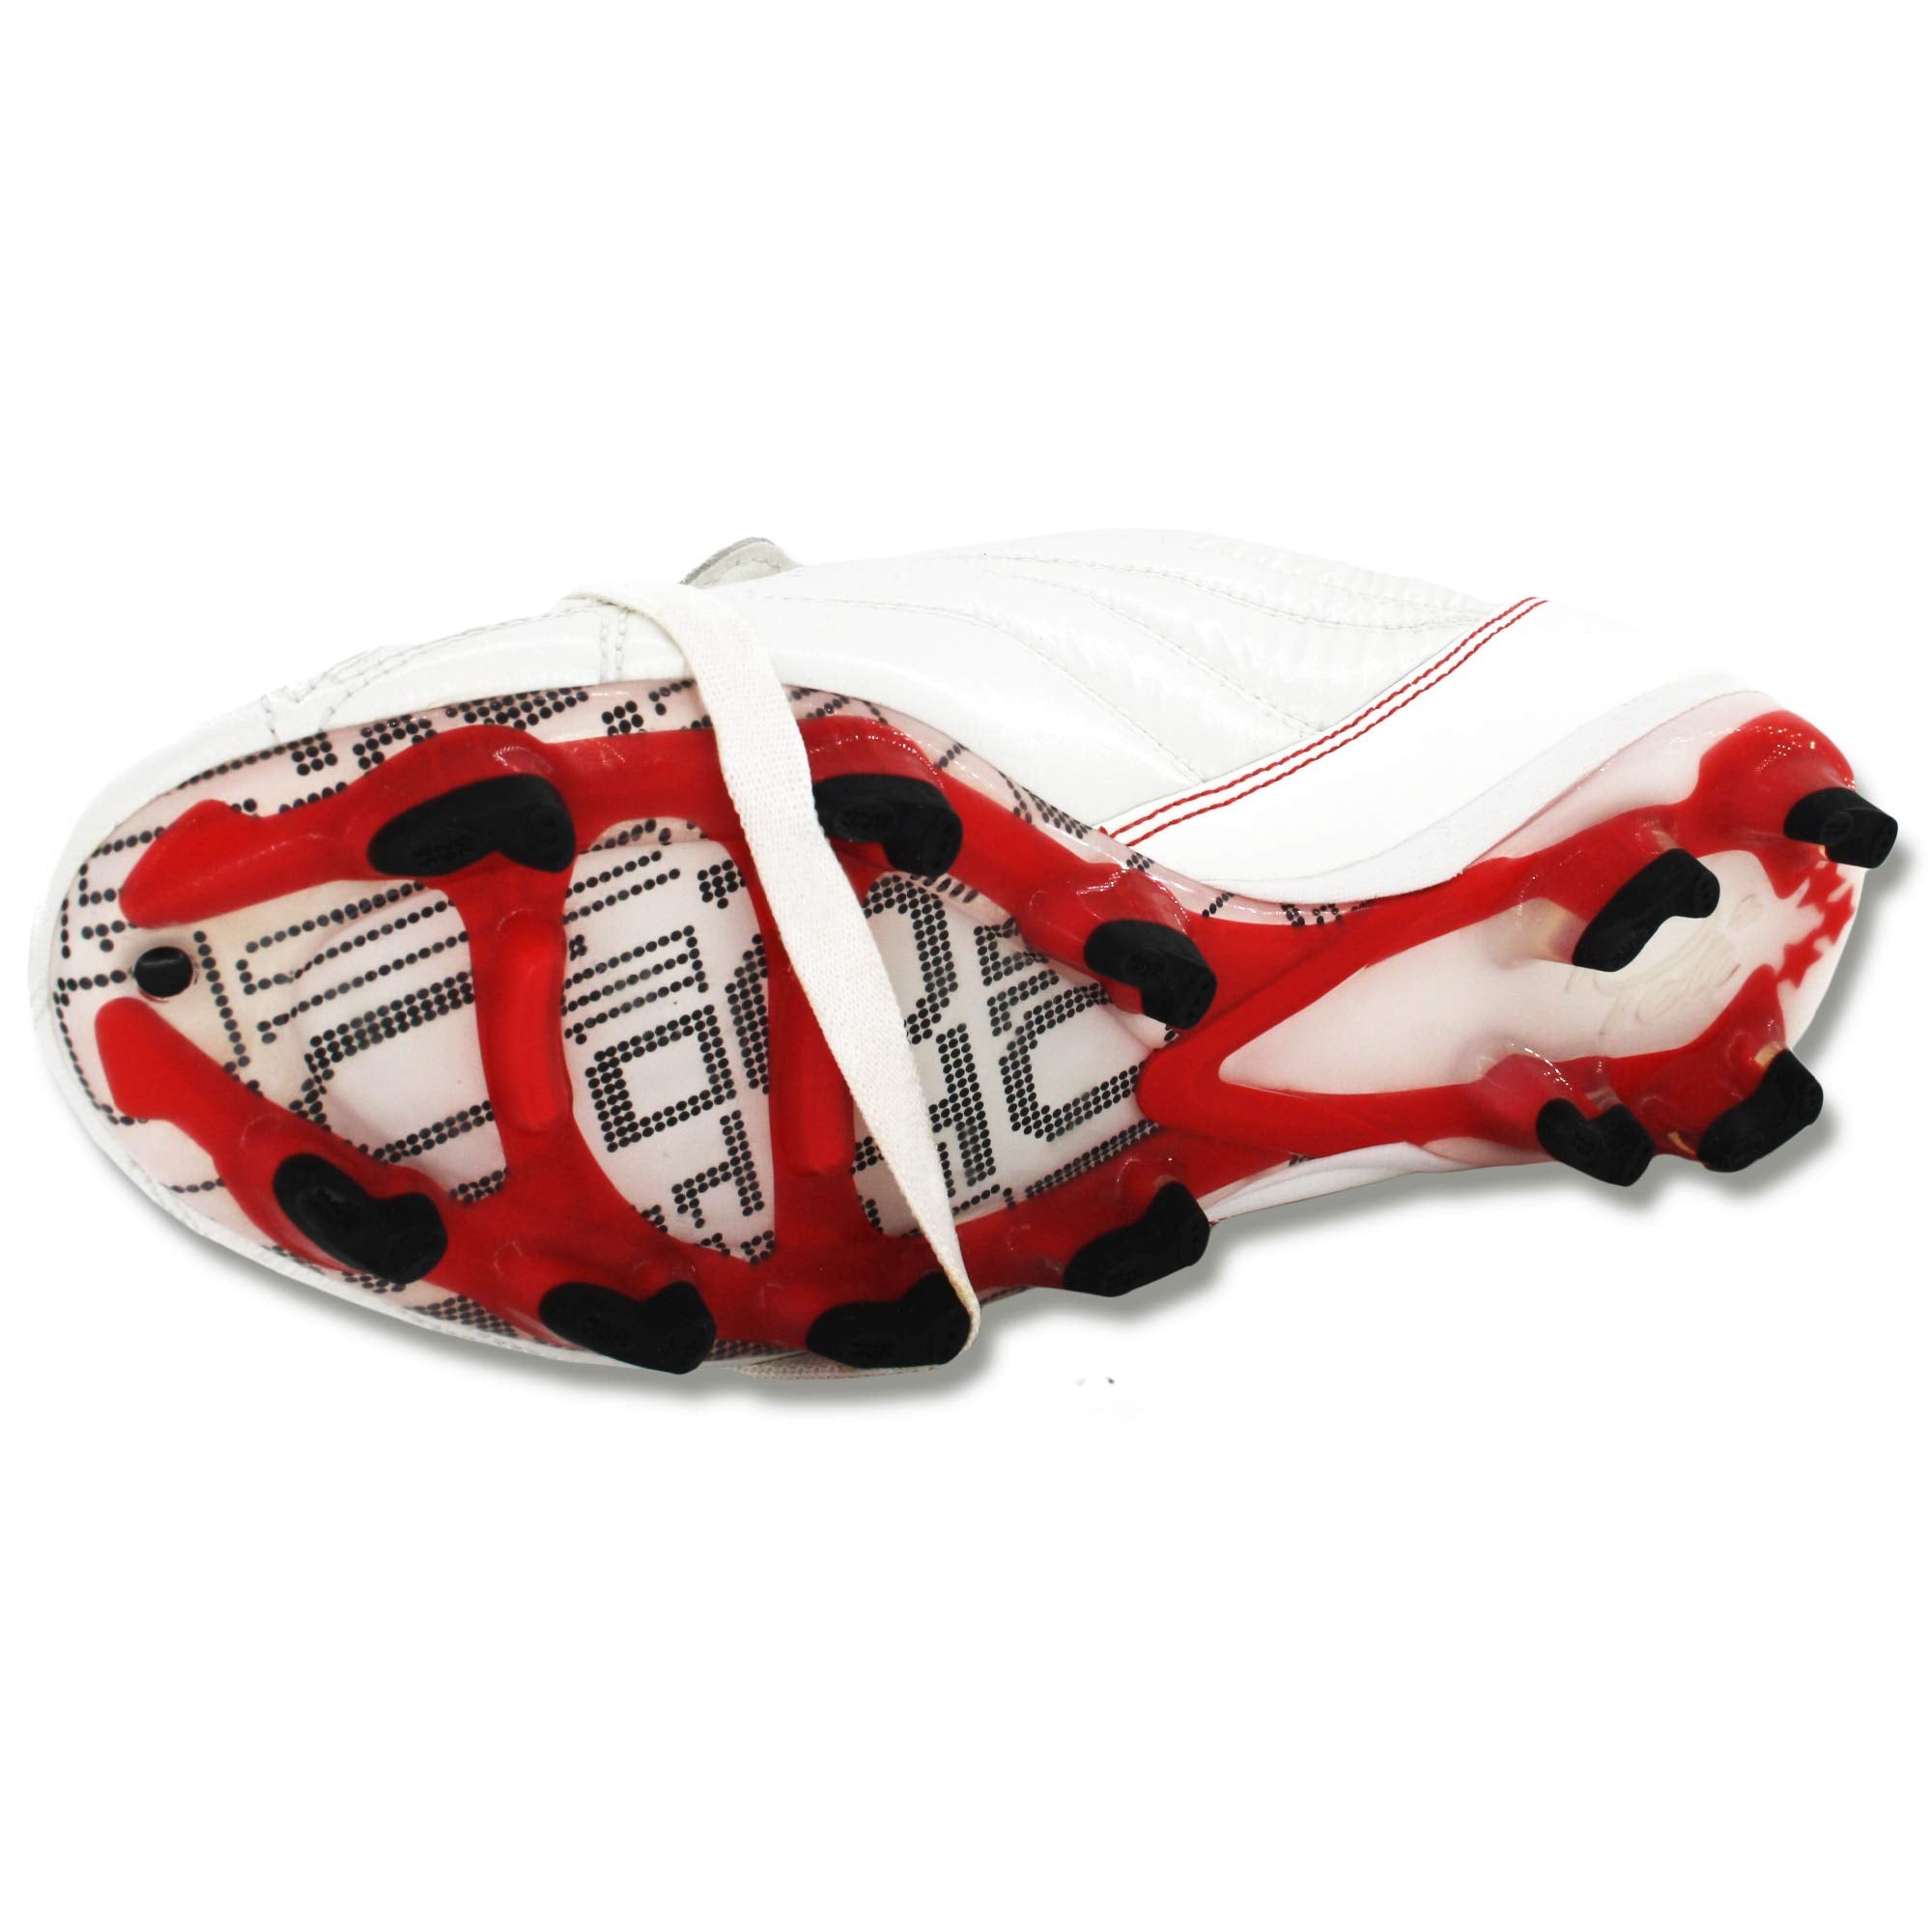 Pele Sports 1962 FG MS Junior Kid's Football Boots - White / Red